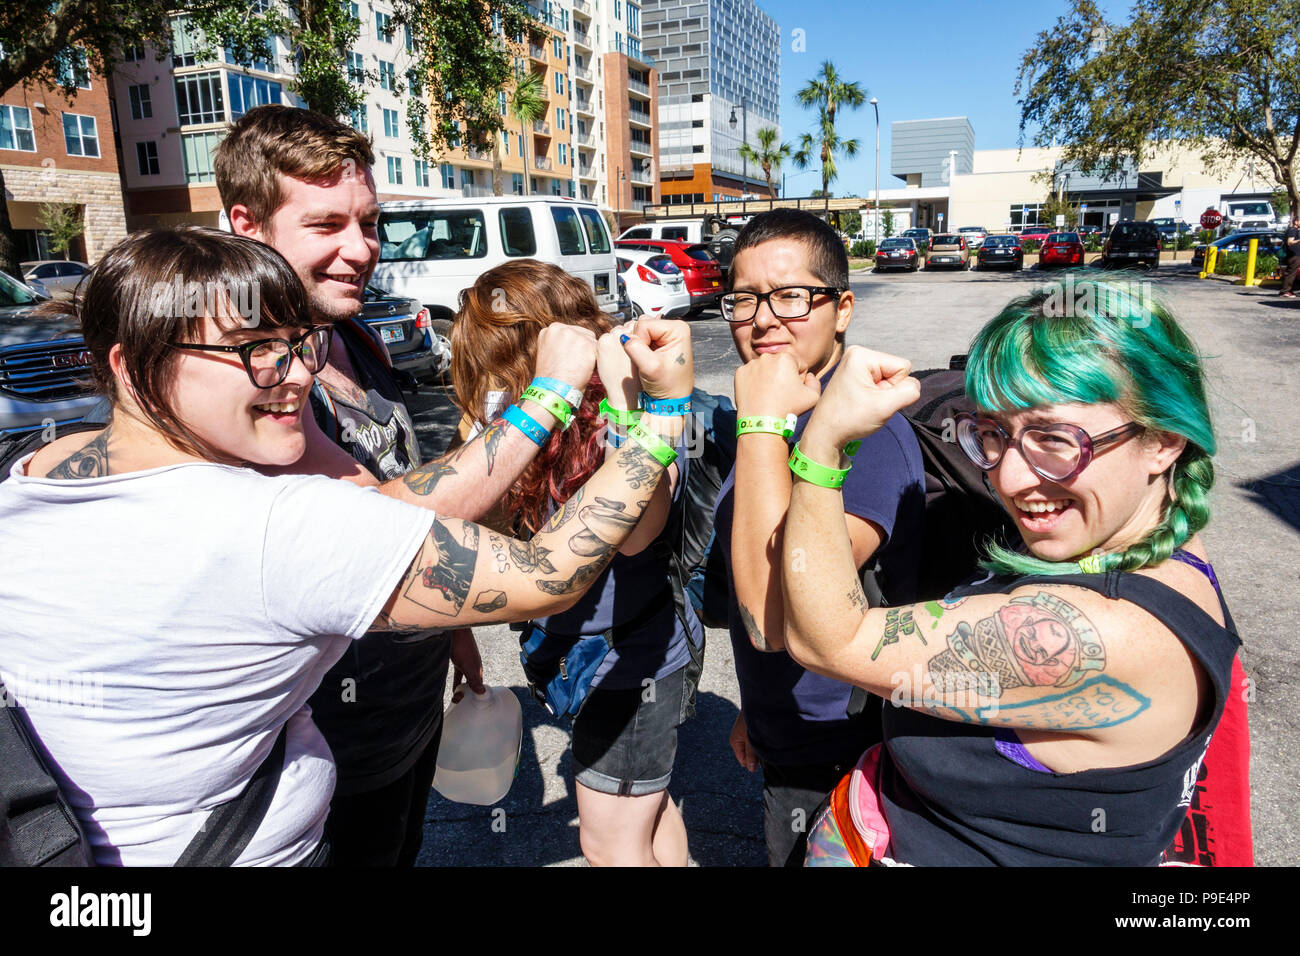 Gainesville Florida,The Fest annual music festival,armbands,fans,man men male,woman female women,college town,students,tattoos,celebrating,green color Stock Photo